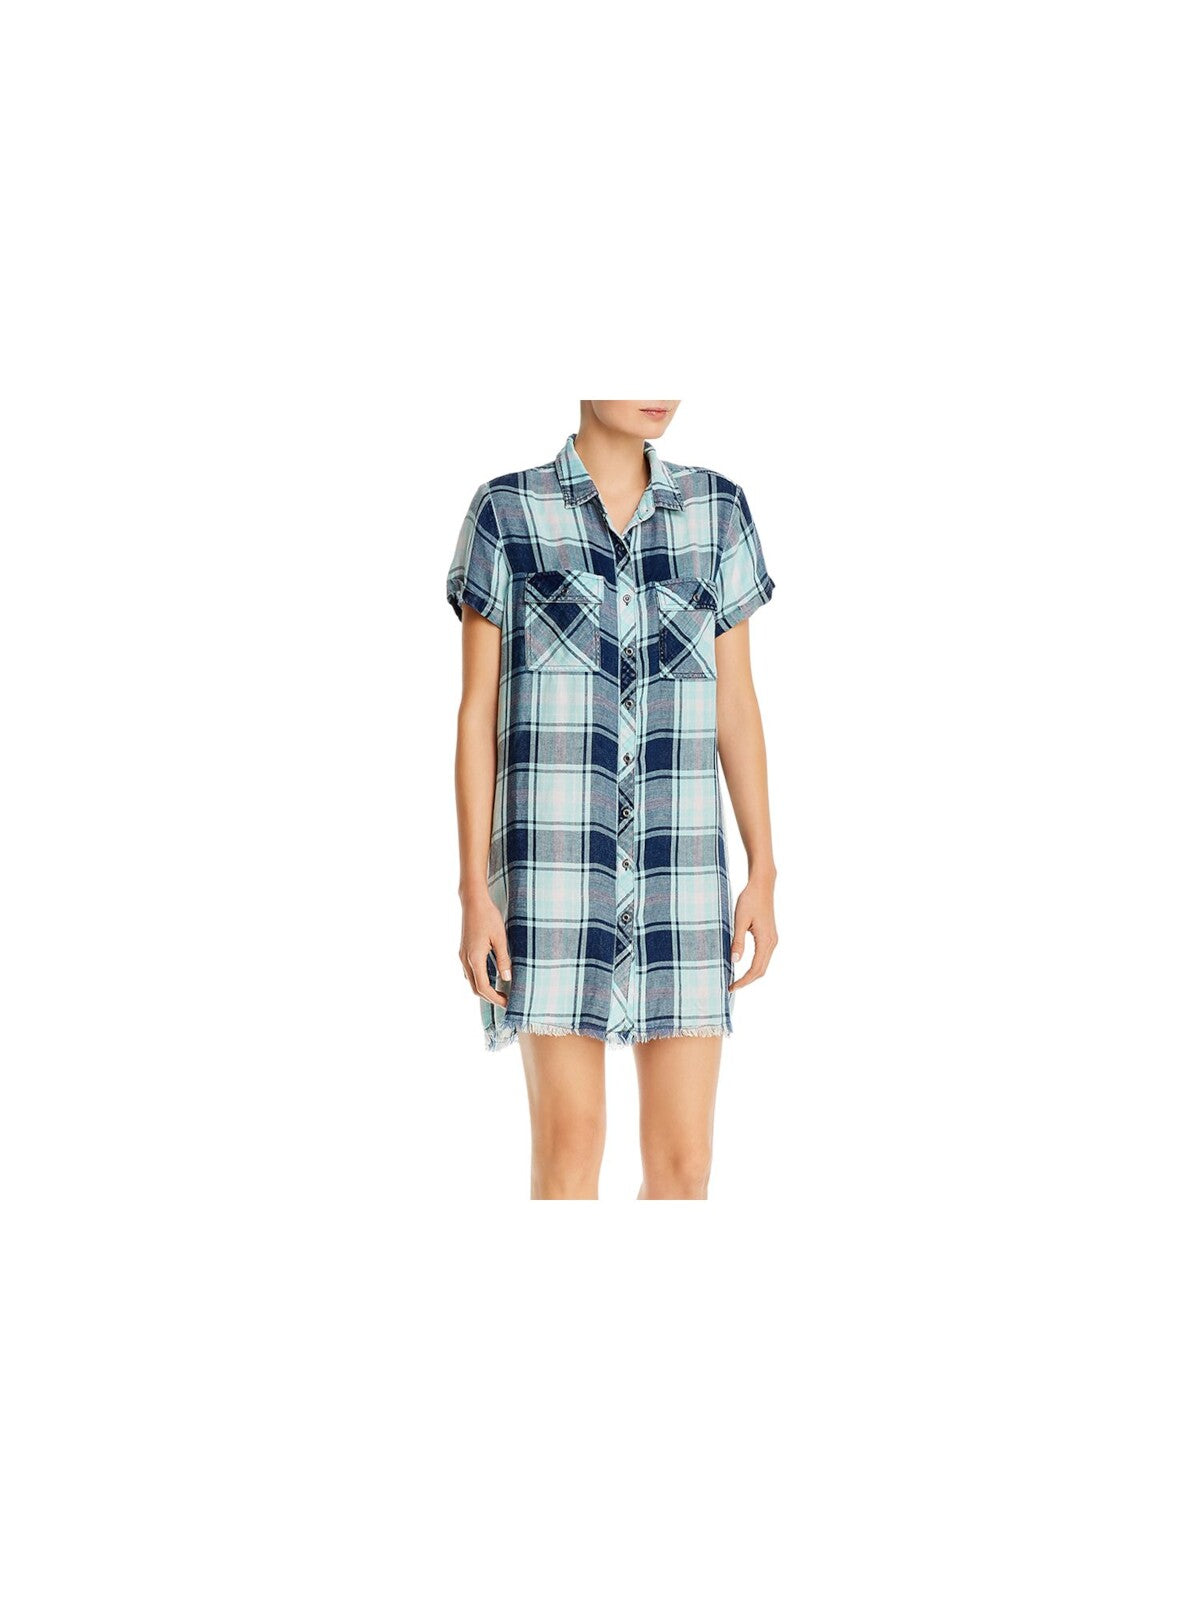 BILLY T Womens Navy Frayed Pocketed Pleated Tie Back Plaid Short Sleeve Collared Short Shirt Dress XL